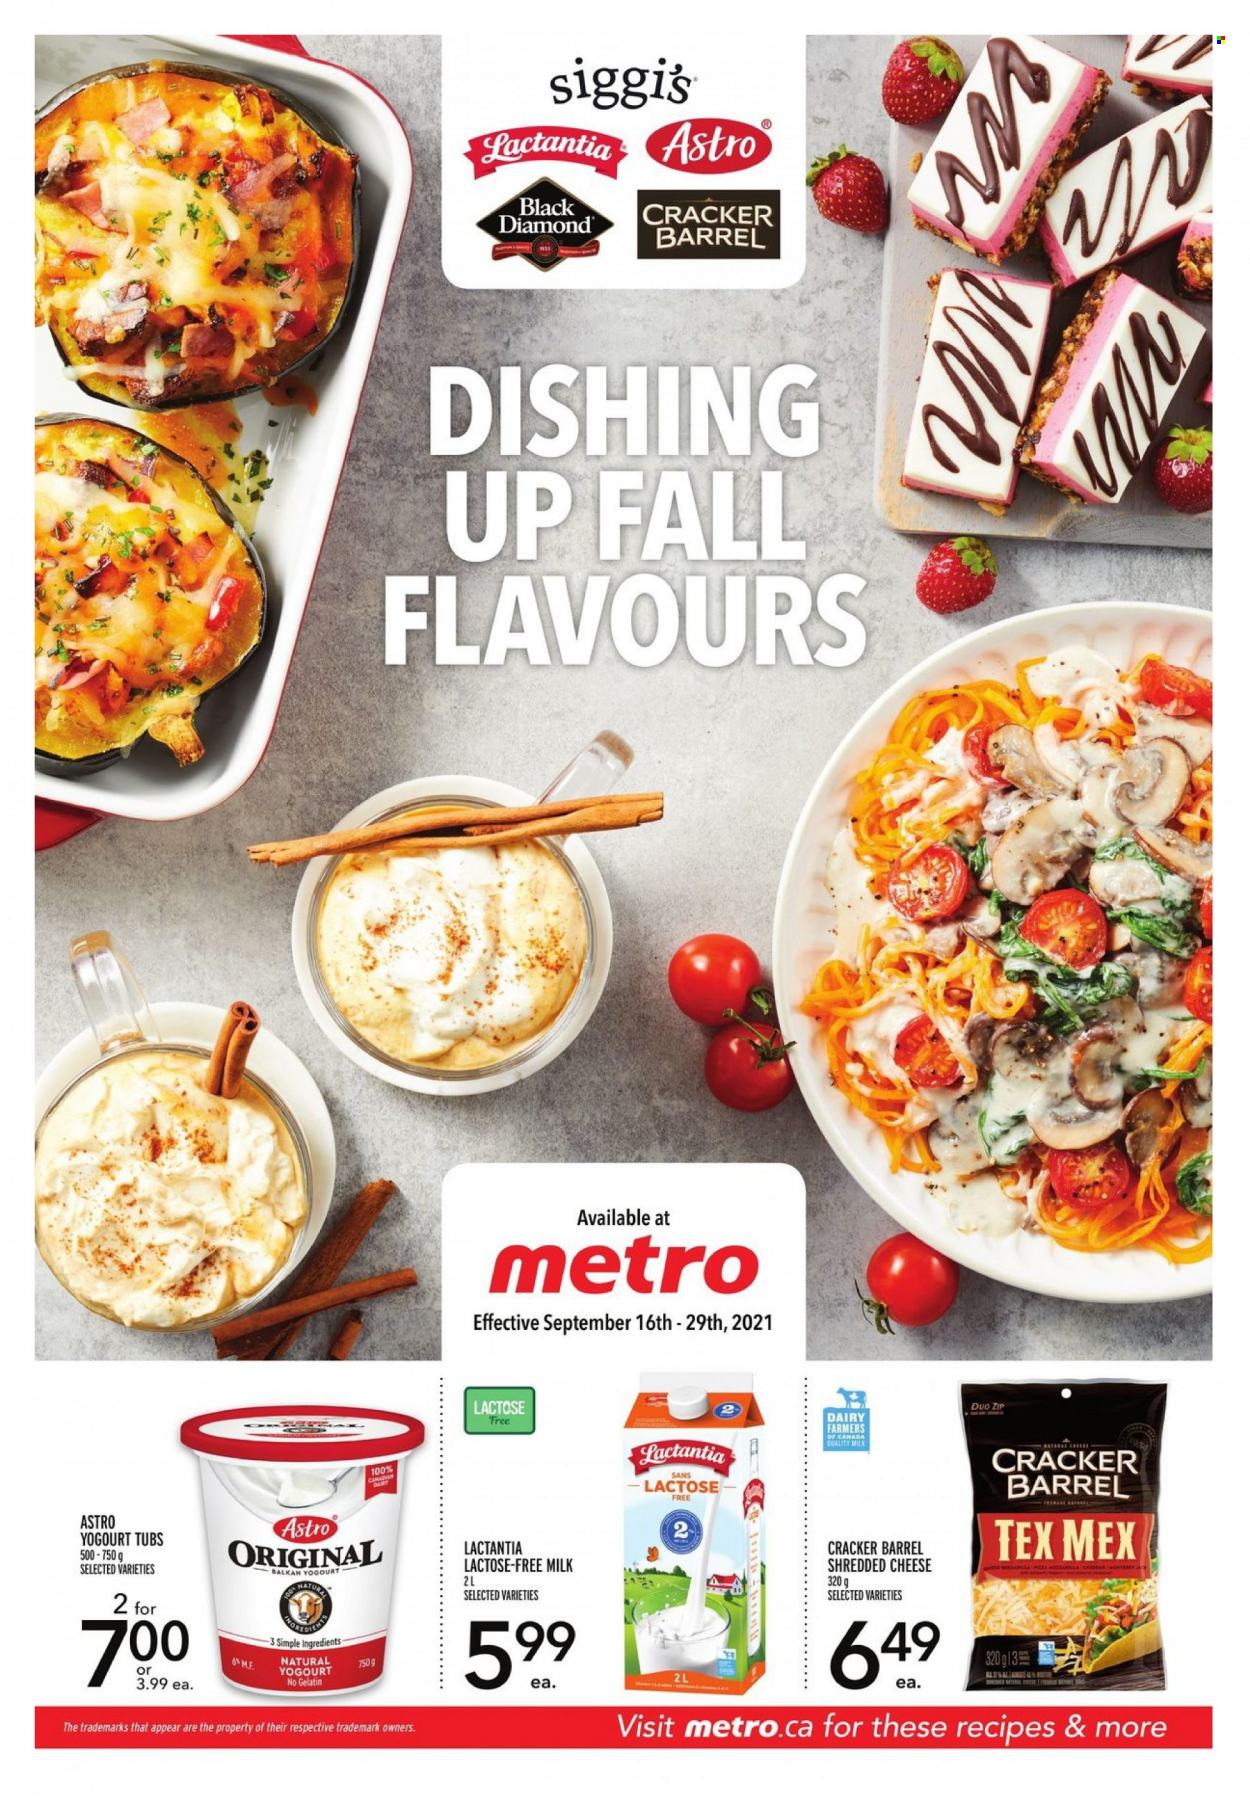 thumbnail - Metro Flyer - September 16, 2021 - September 29, 2021 - Sales products - shredded cheese, milk, crackers, gelatin. Page 1.